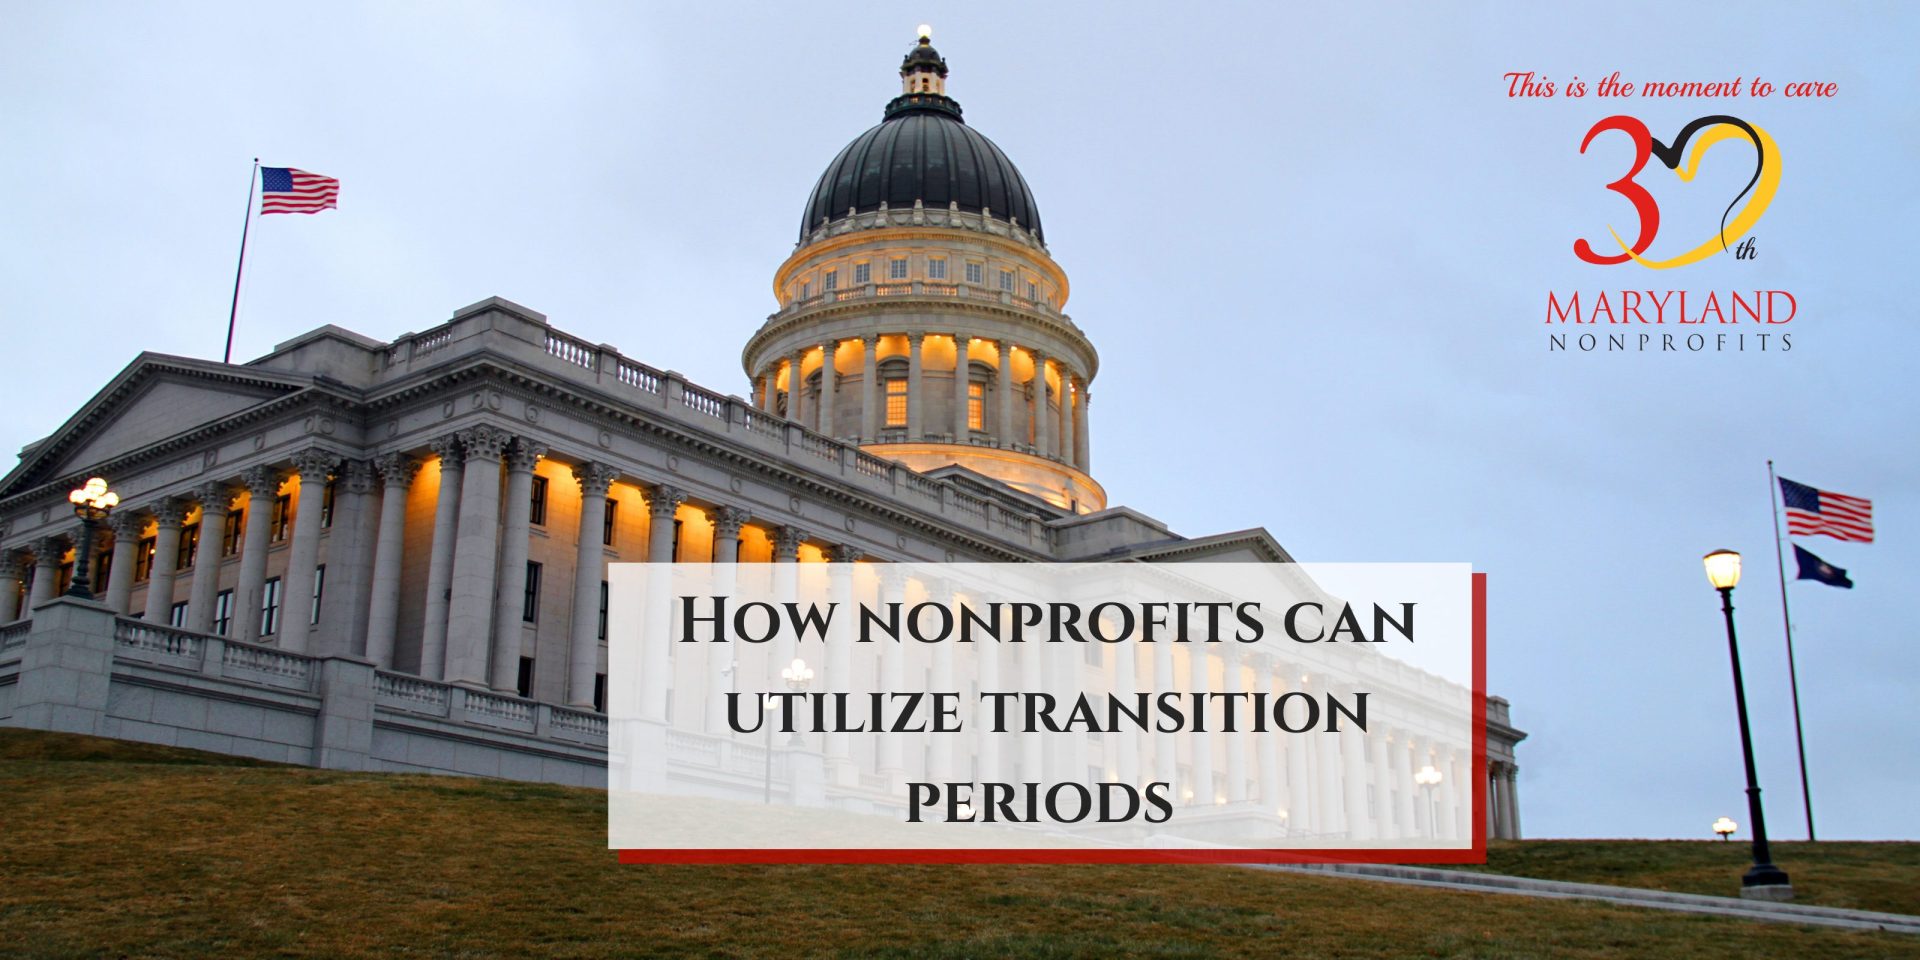 How nonprofits can utilize transition periods